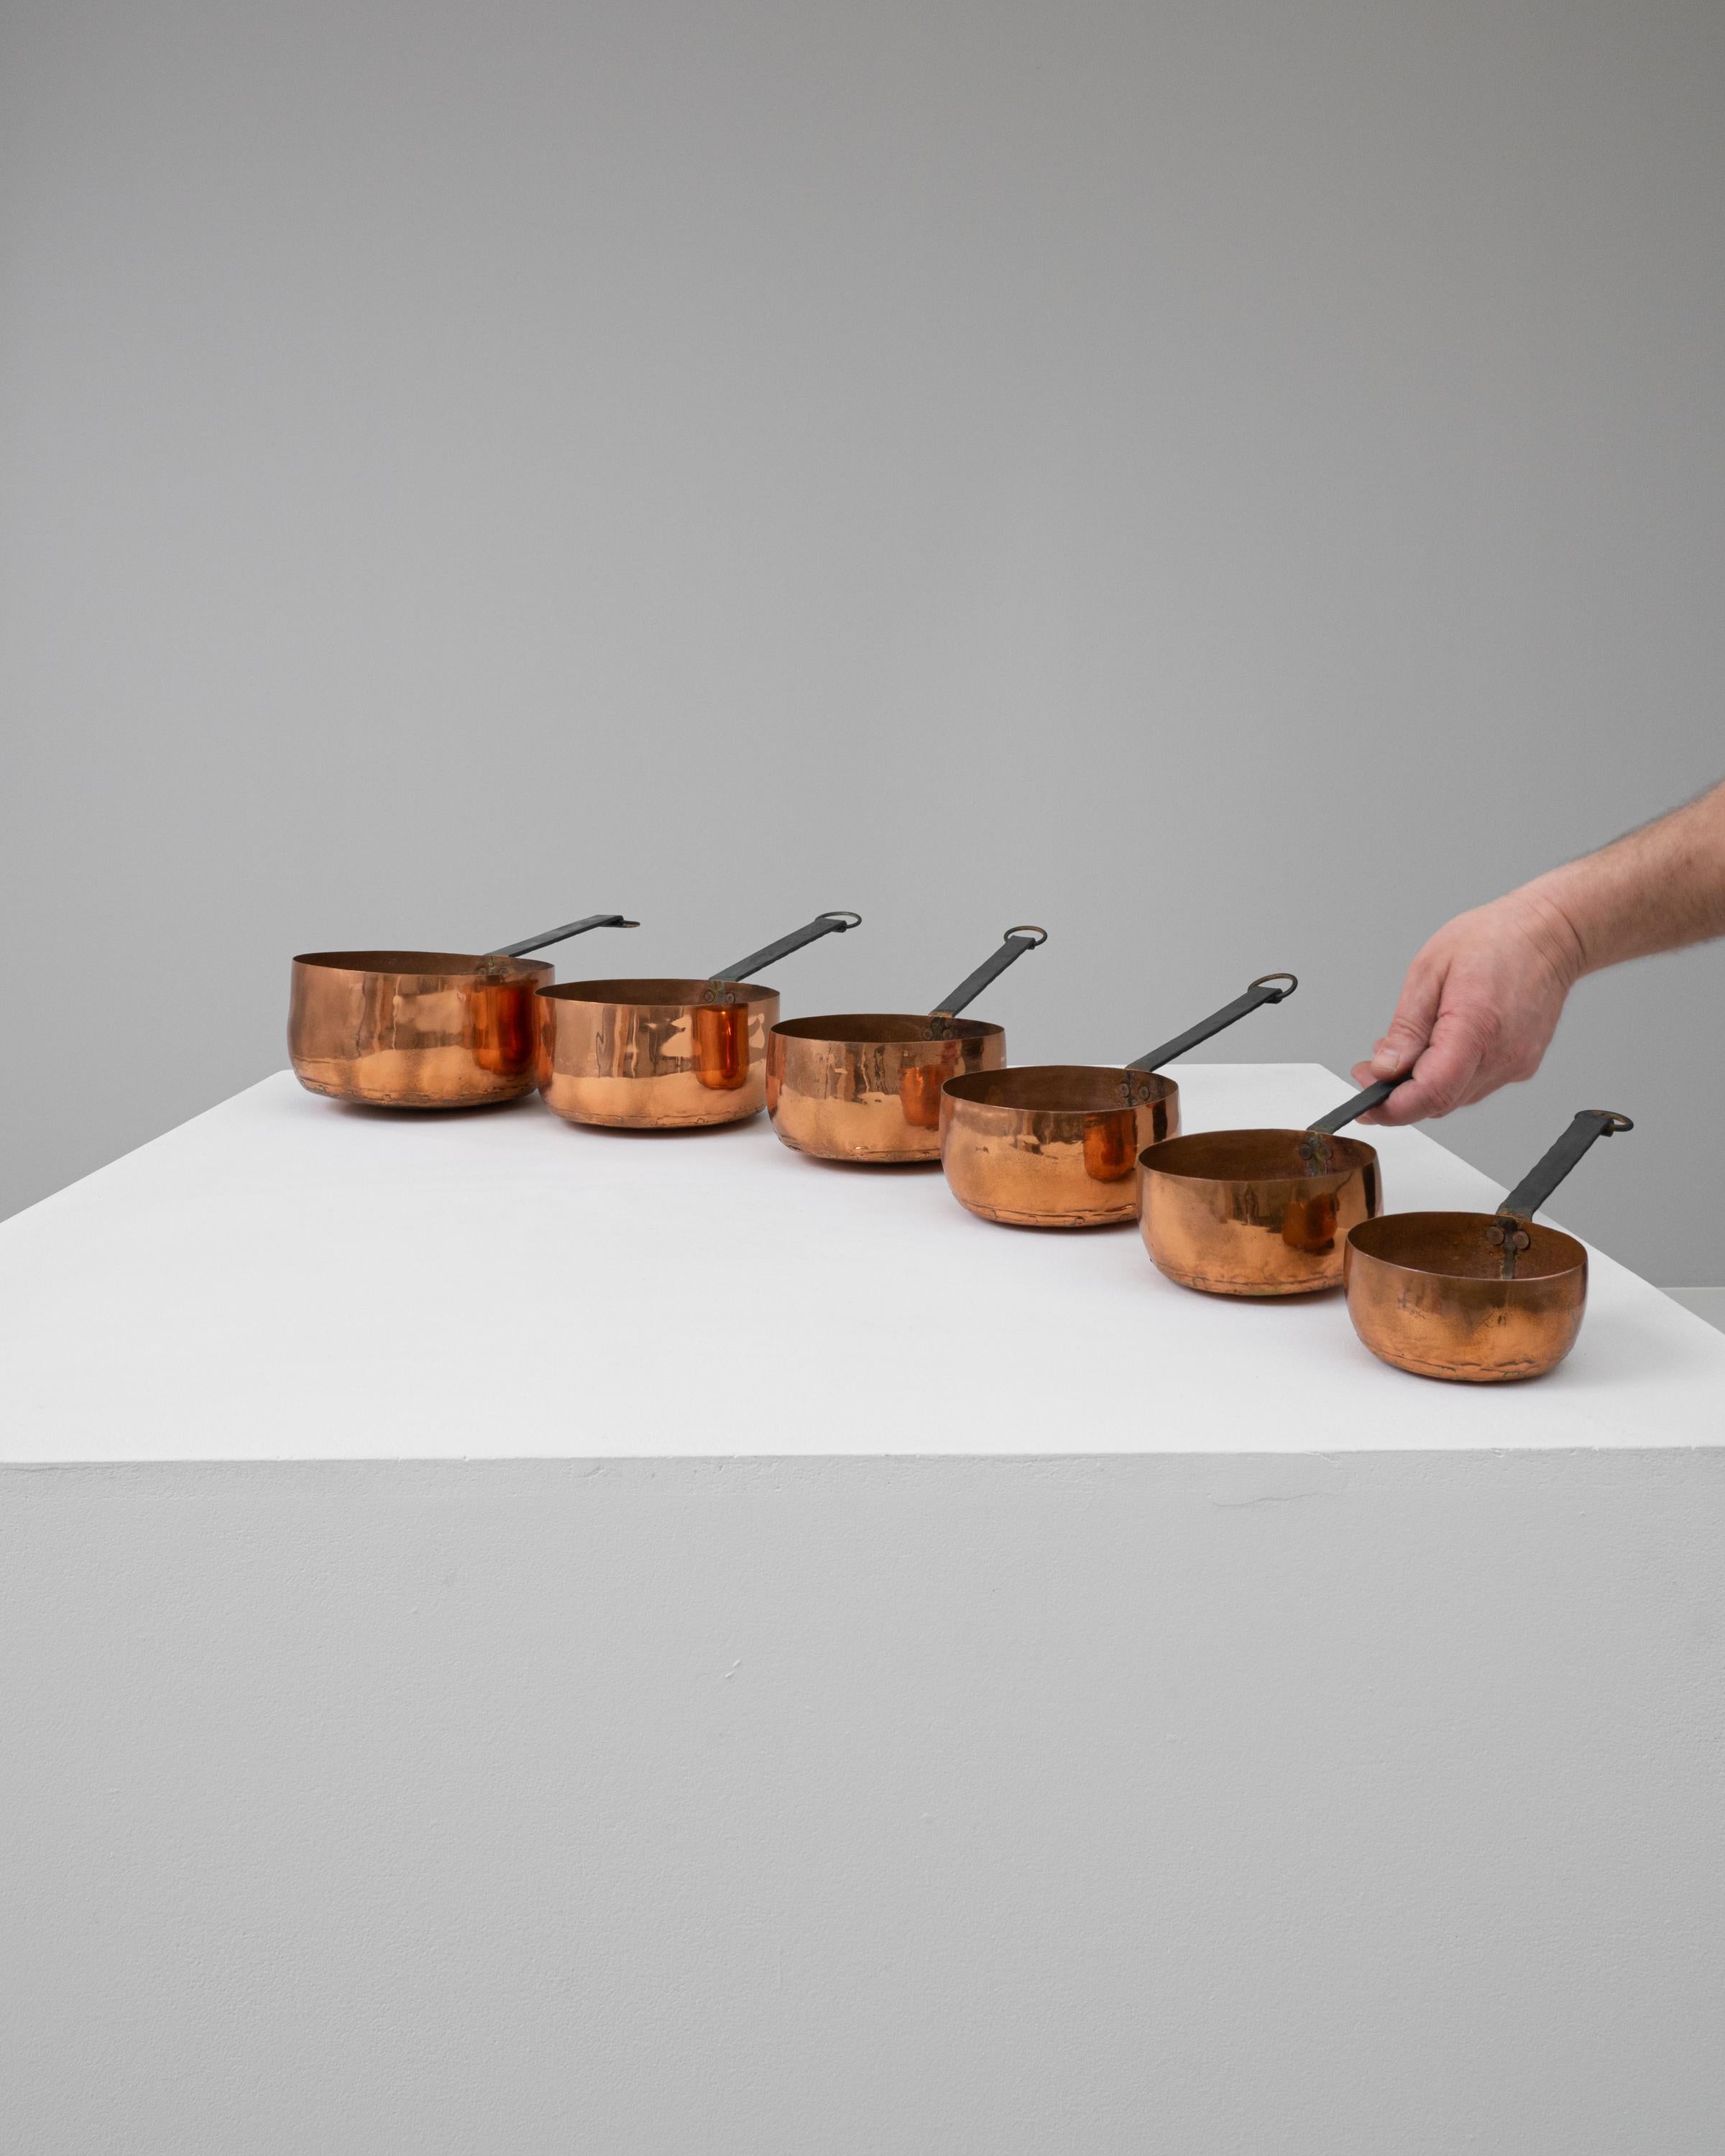 Elevate your culinary experiences with this exquisite set of six 20th-century French brass pots. Artfully crafted with the finest brass, these pots boast a radiant, sun-kissed hue that promises to warm the aesthetics of any kitchen. The graduated